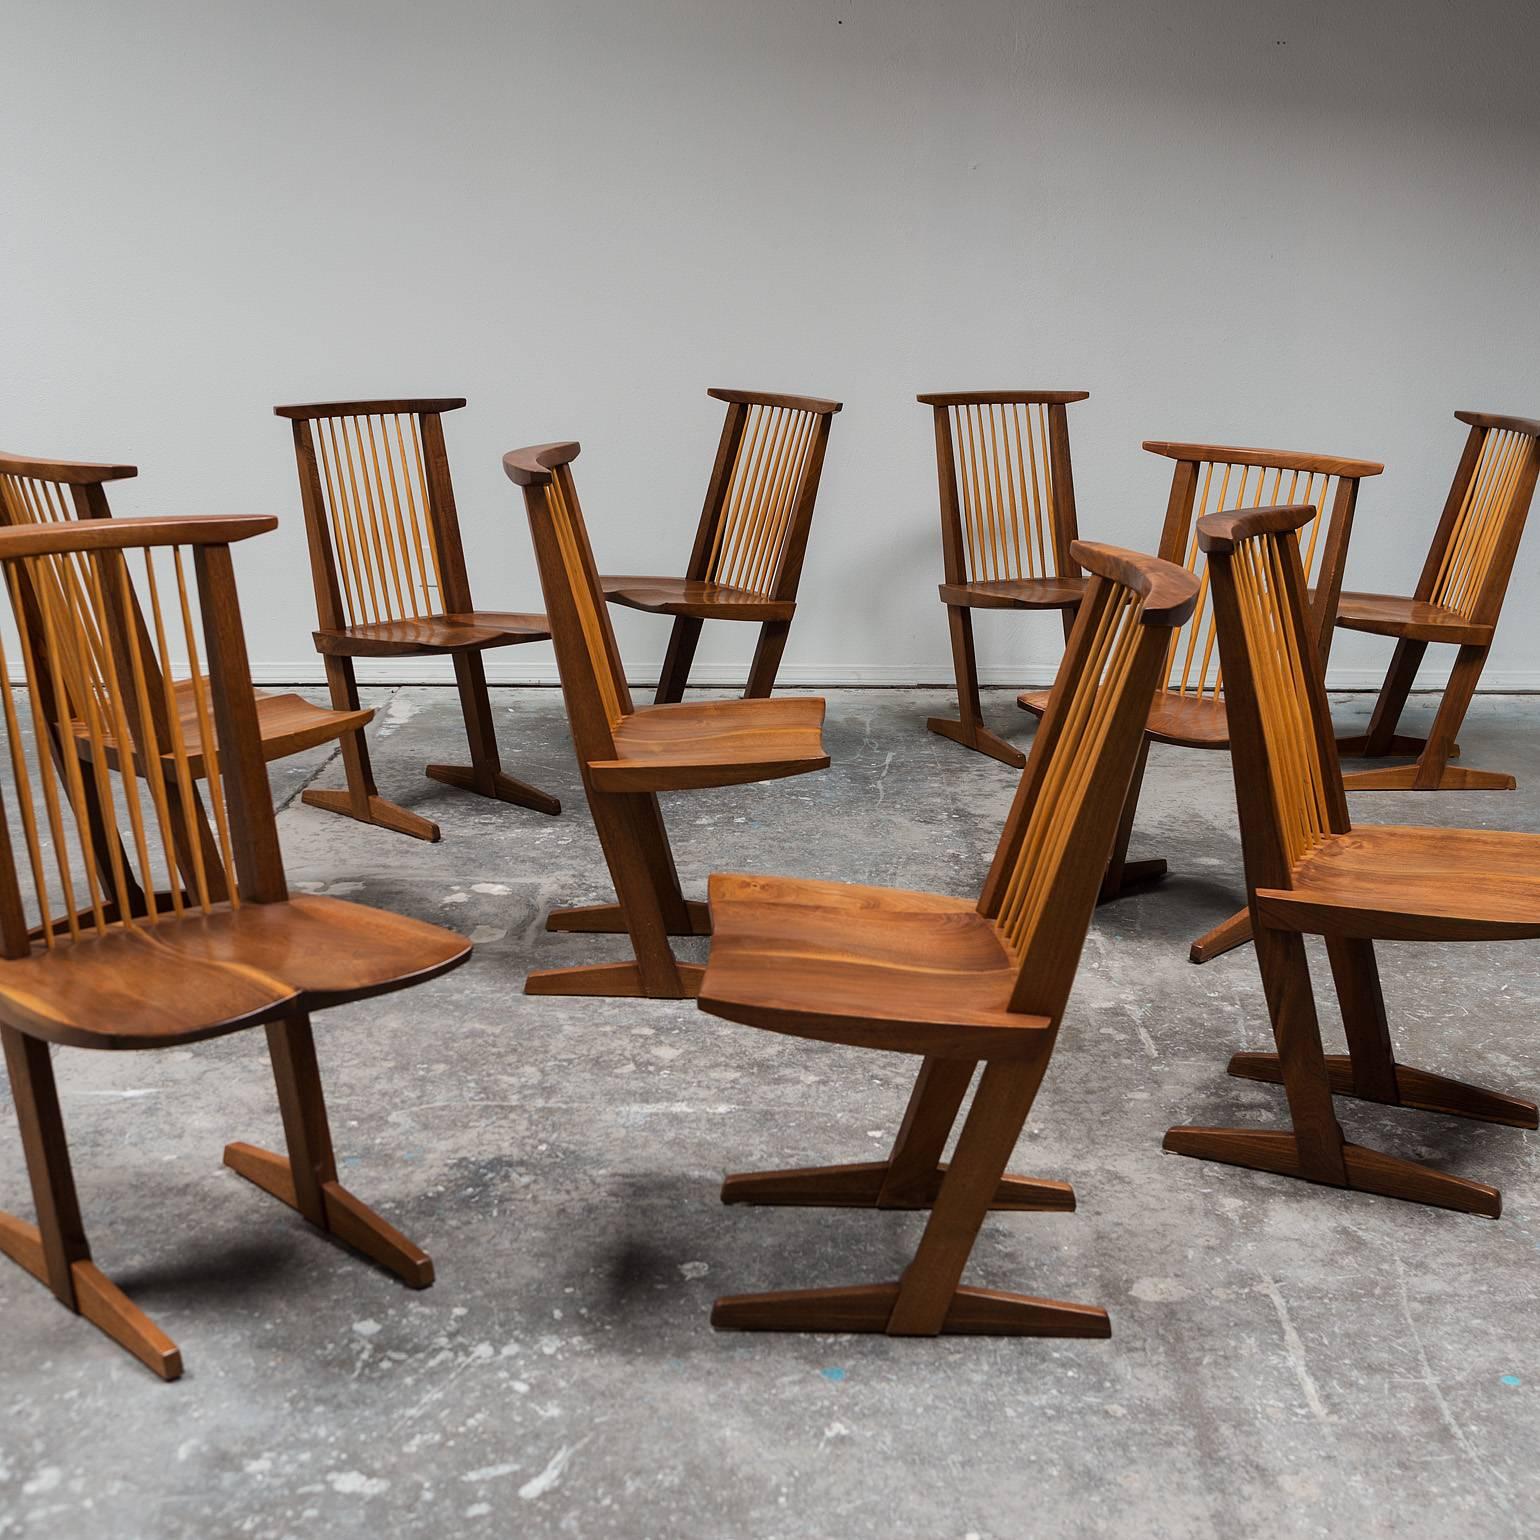 Set of Four Conoid Chairs by George Nakashima, 1982 For Sale 2